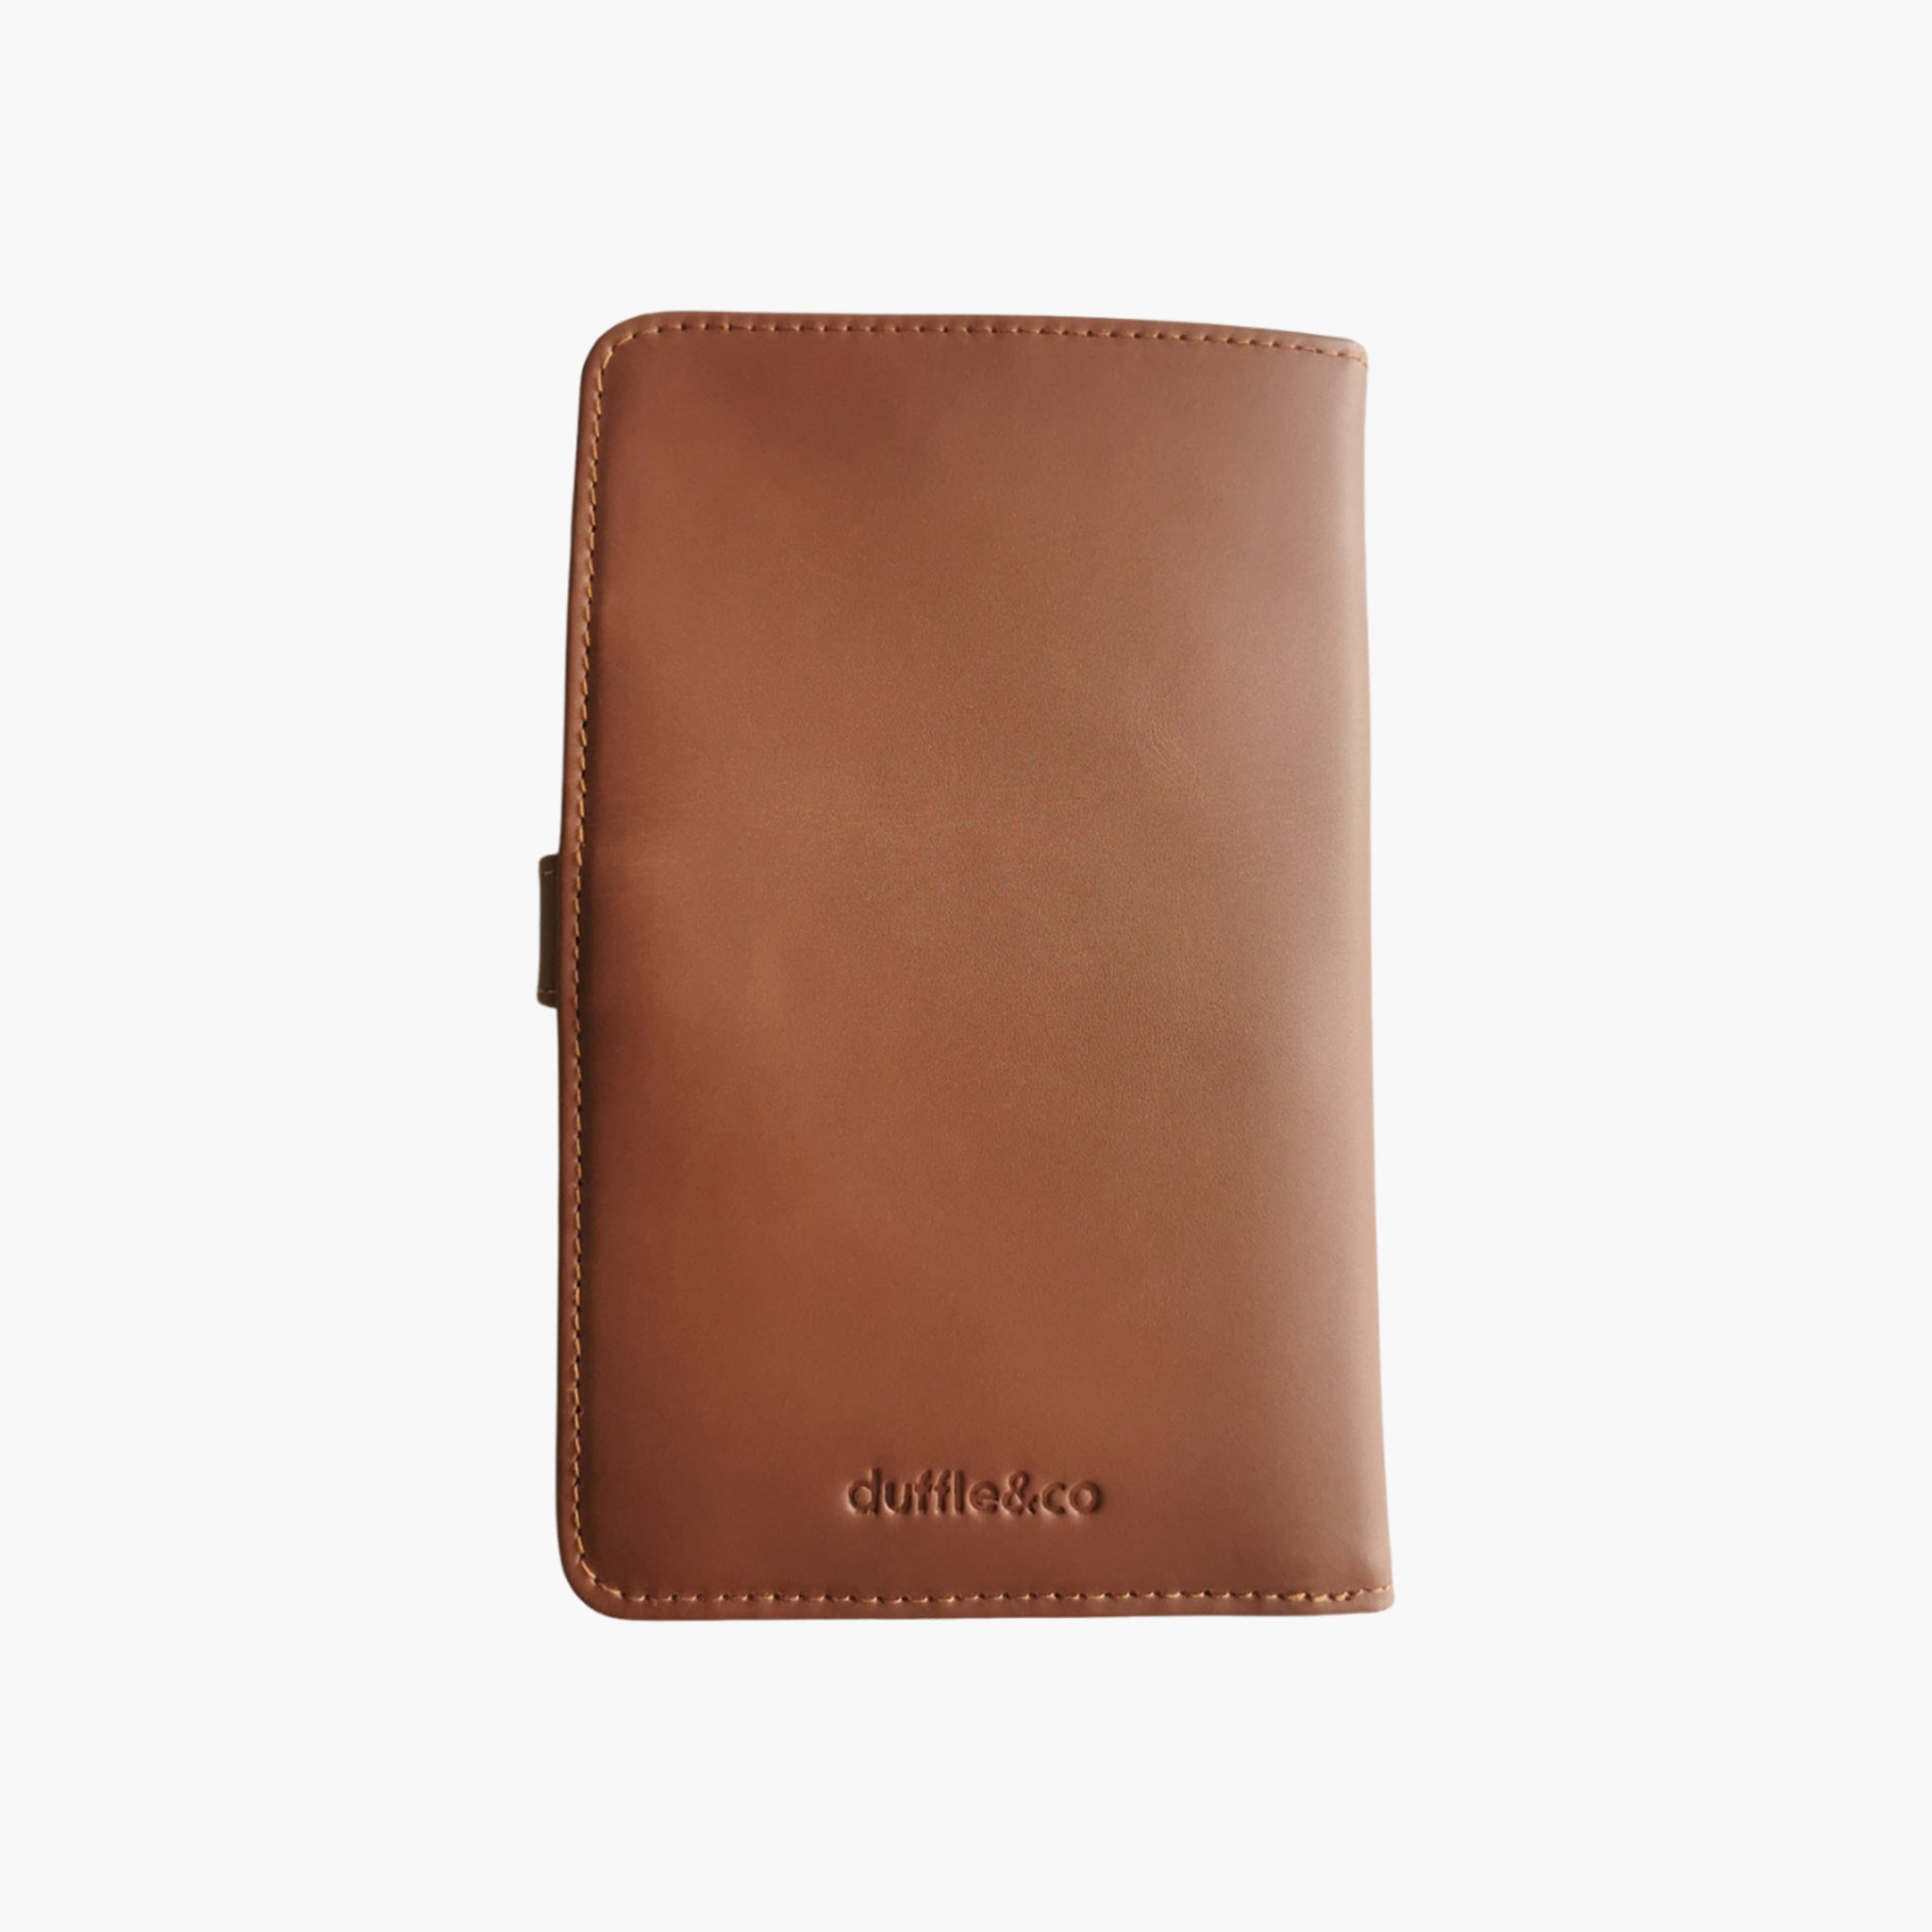 A5 Notebook Cover Organiser in Tan Leather by Duffle&Co